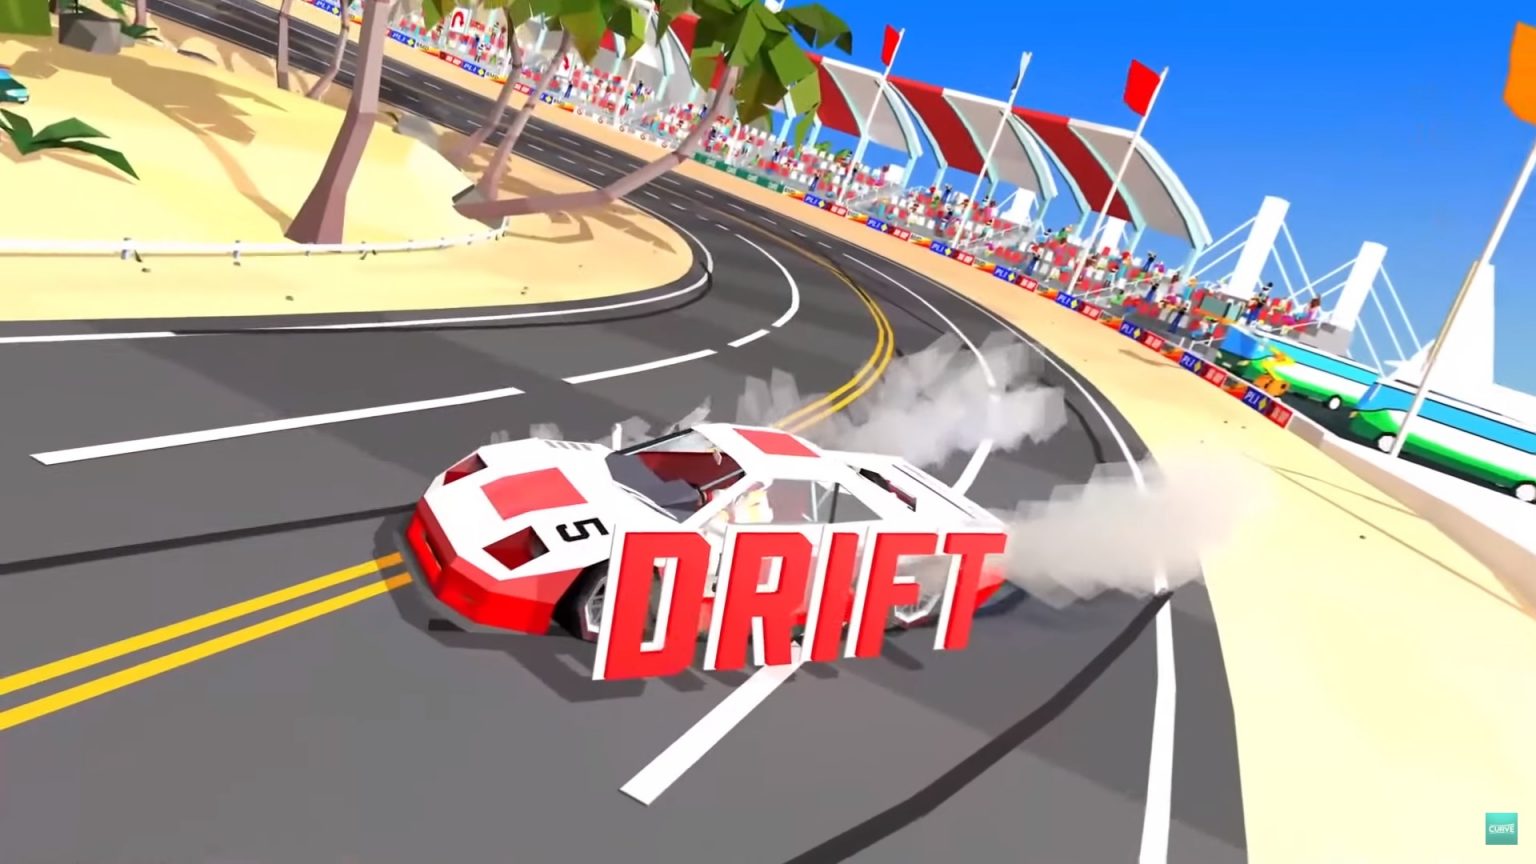 A New Racing Game by Curve Digital Coming in the Near Future